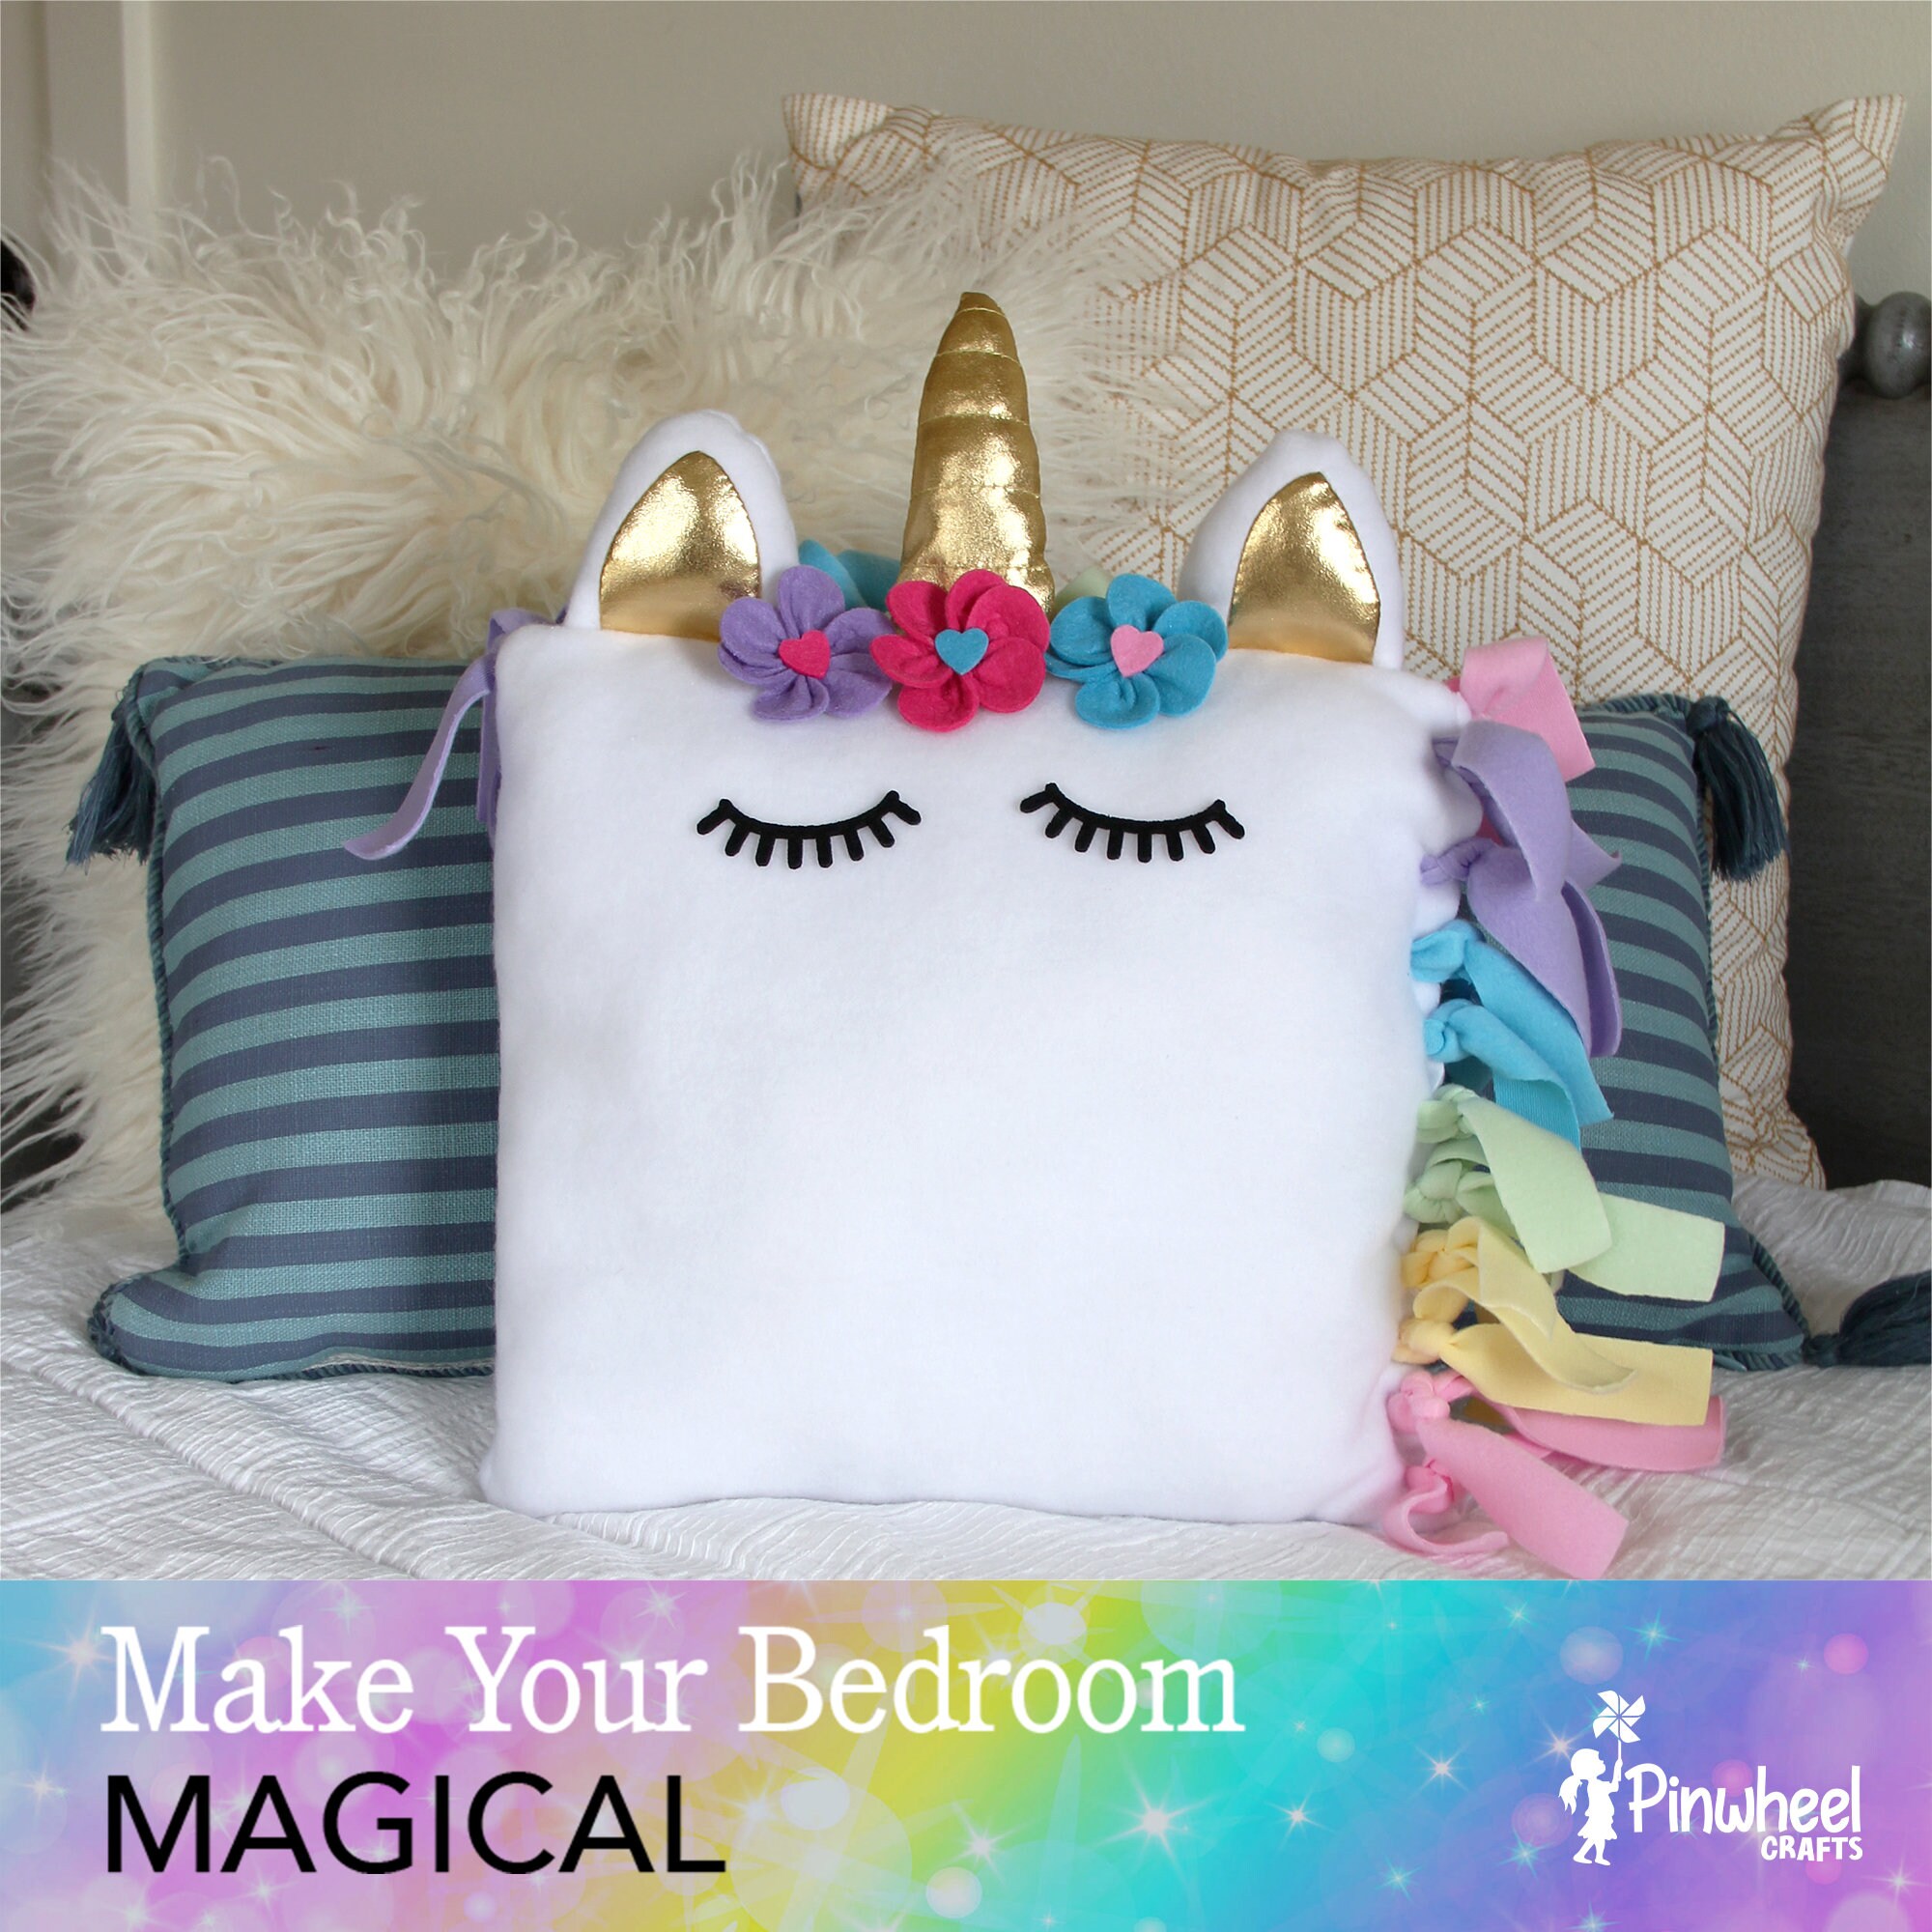 thinkstar Unicorn Pillow Kit - No Sew Unicorn Craft Kit - Gifts For Girls, Arts  And Crafts For Kids Ages 8-12 - Unicorn Toys For 6 Y…